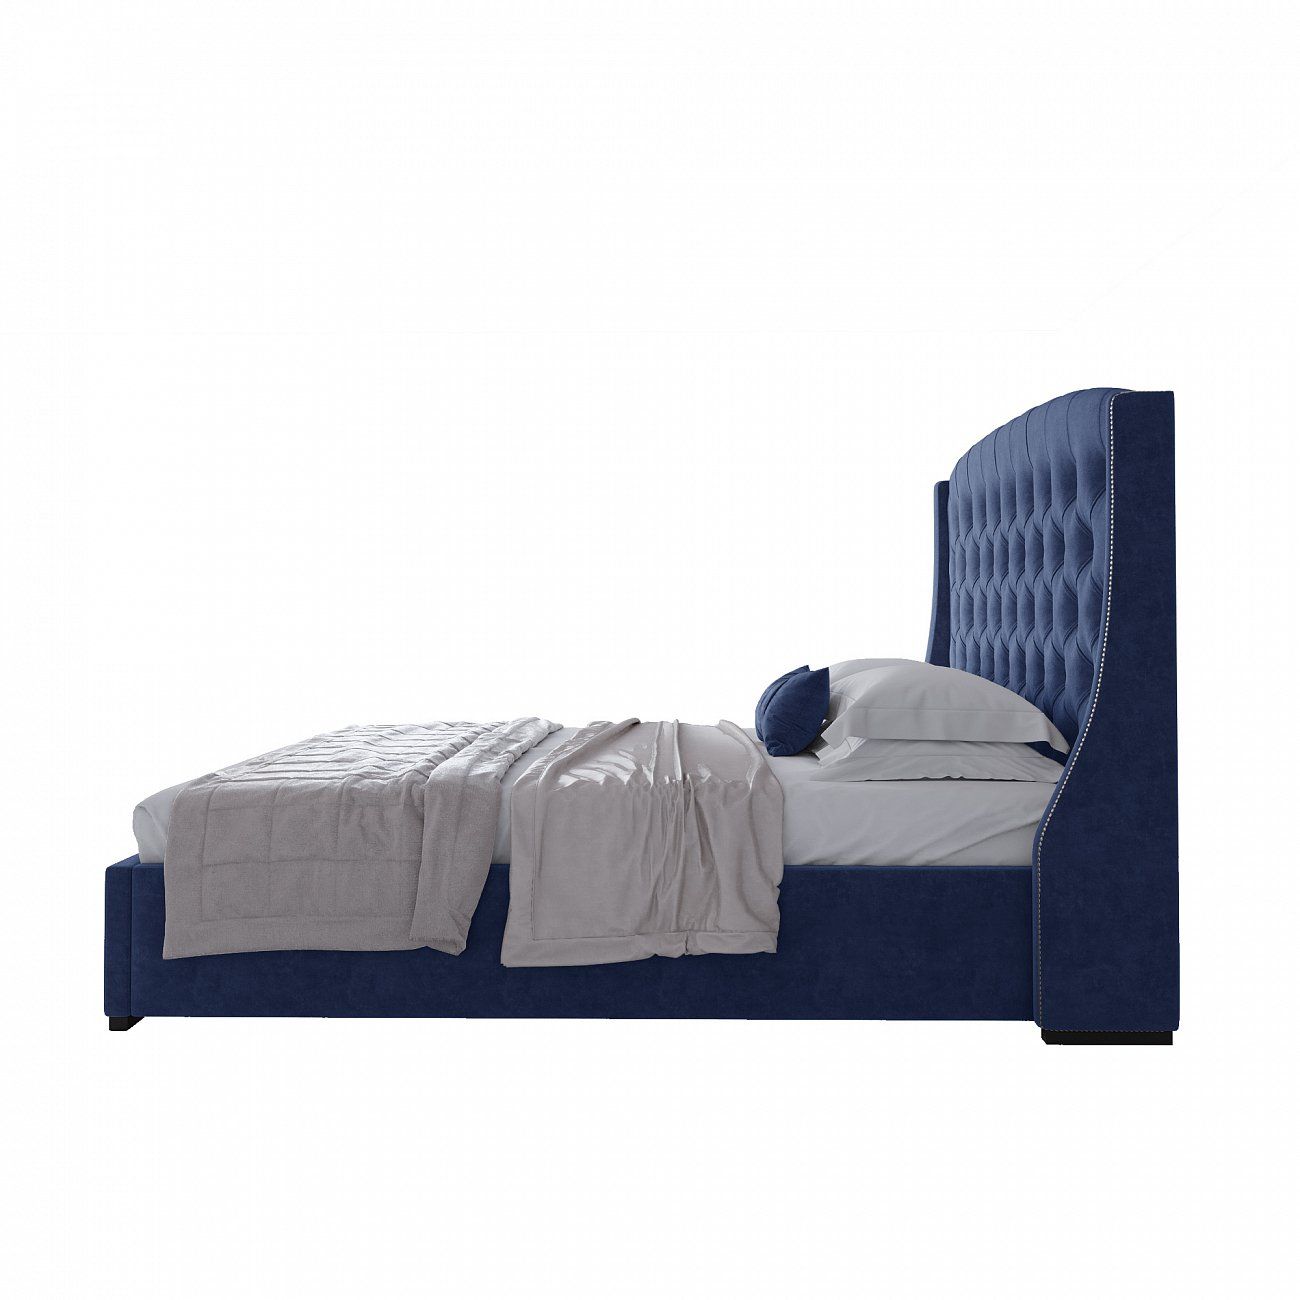 Double bed with upholstered headboard 180x200 cm blue Hugo